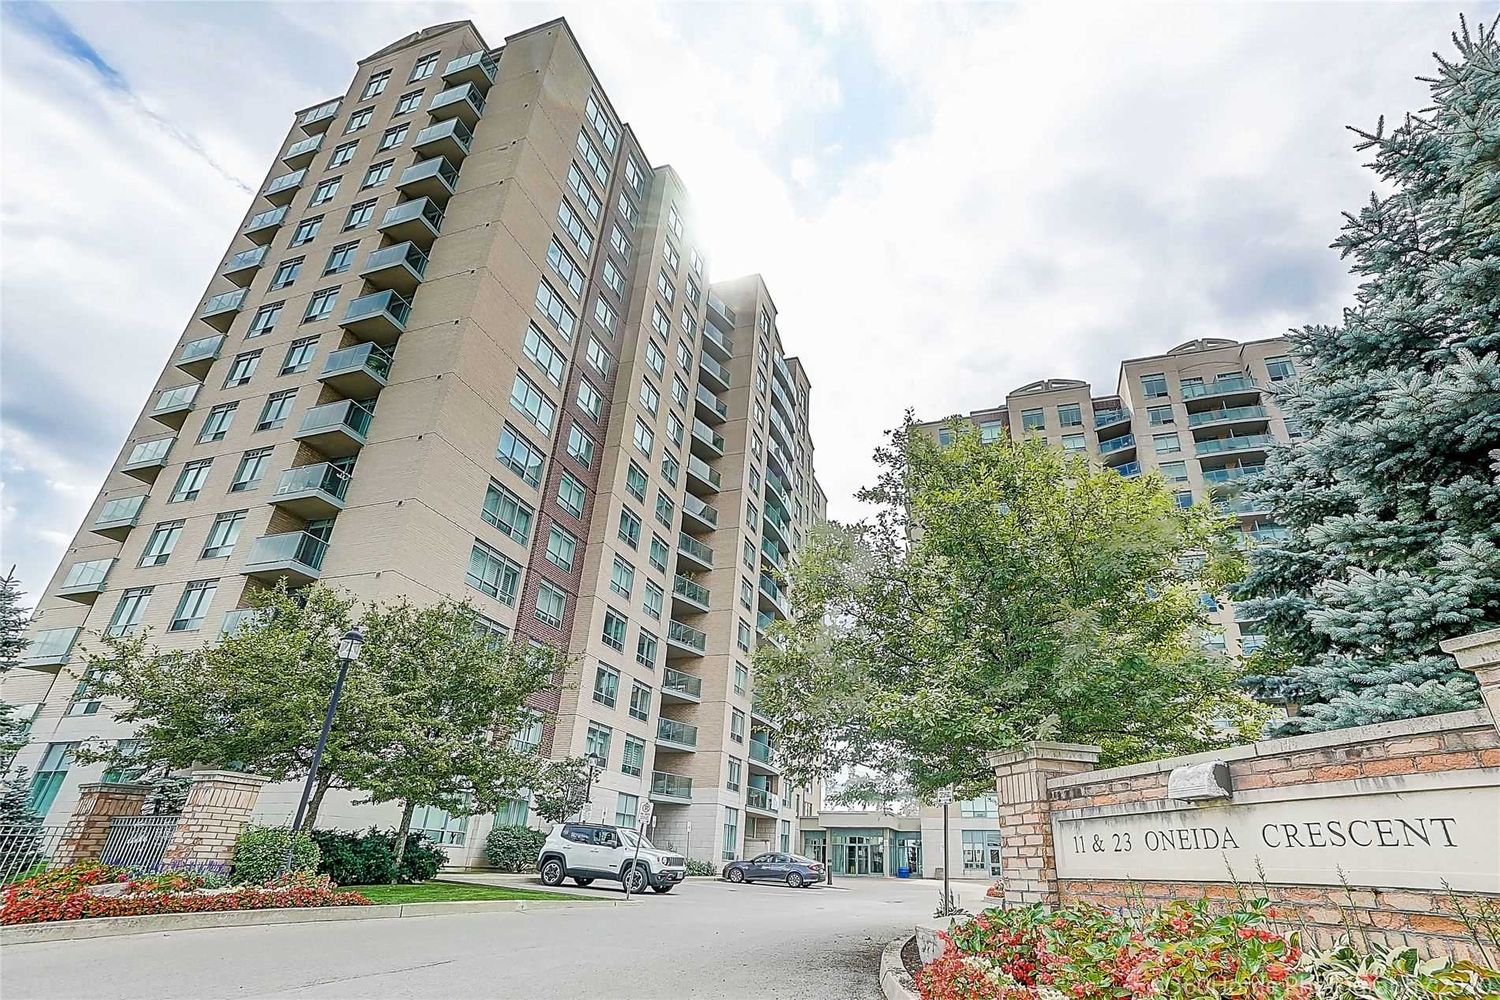 11 Oneida Crescent. The Gates of Bayview IV Glen Condos is located in  Richmond Hill, Toronto - image #2 of 3